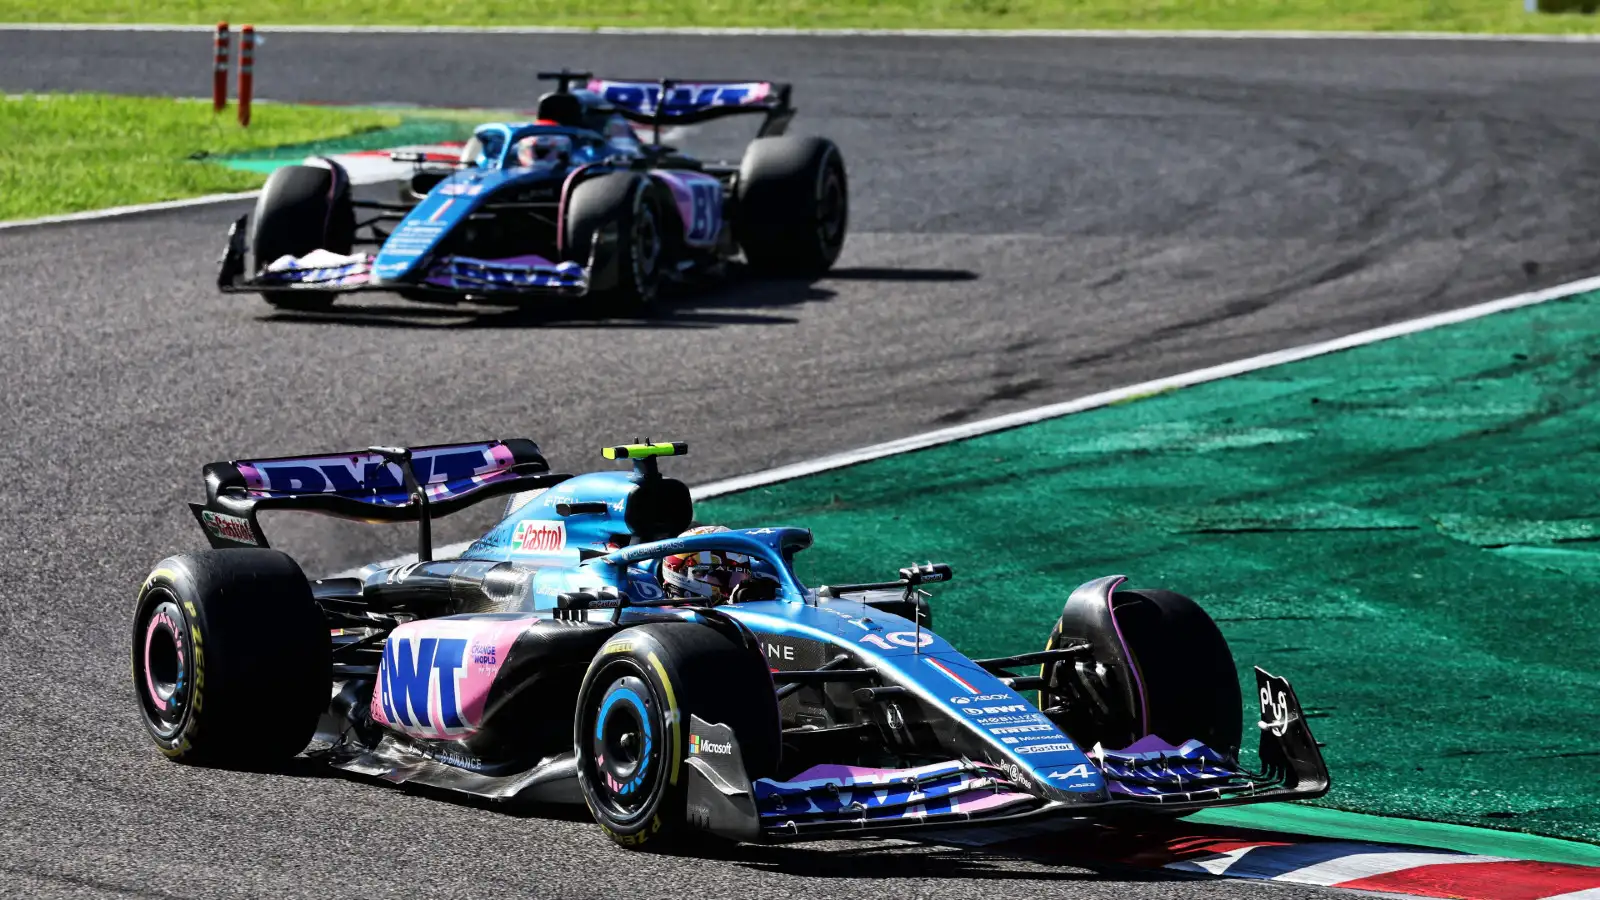 Alpine's Pierre Gasly and Esteban Ocon racing during the Japanese Grand Prix.